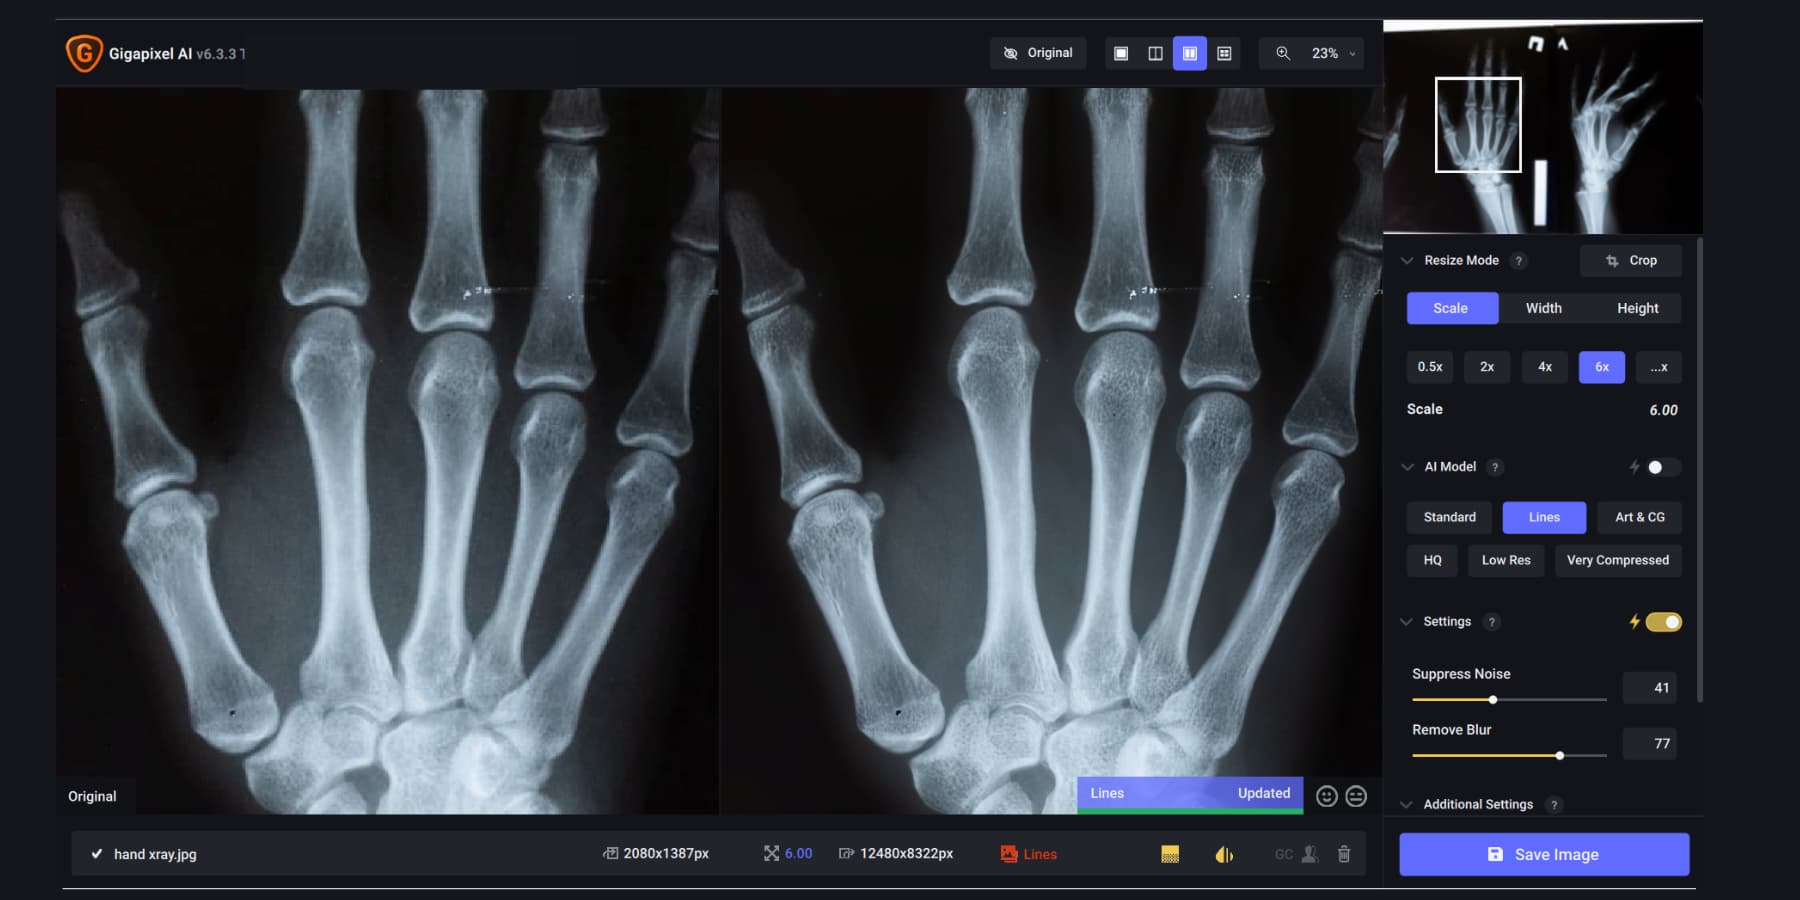 A screenshot of Gigapixel AI's enhancing an X-ray image of somebody's hand